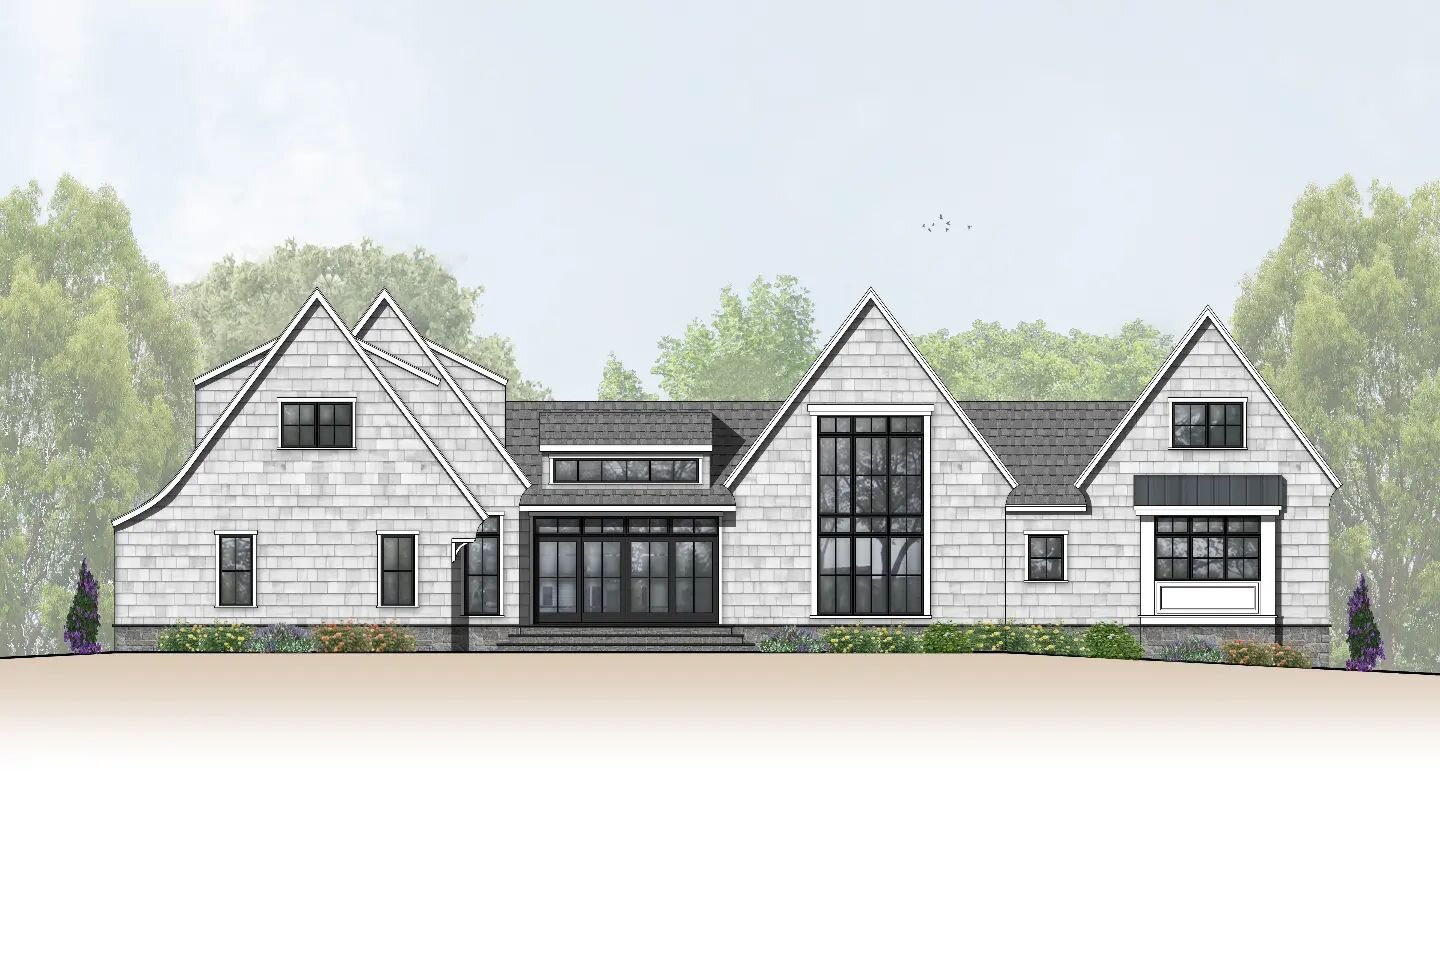 This custom waterfront cape house is starting to take shape! We look forward to seeing this project transform from a colored graphic to reality. #architecturedesign #architecture #capecod #capestyle #shinglestyle